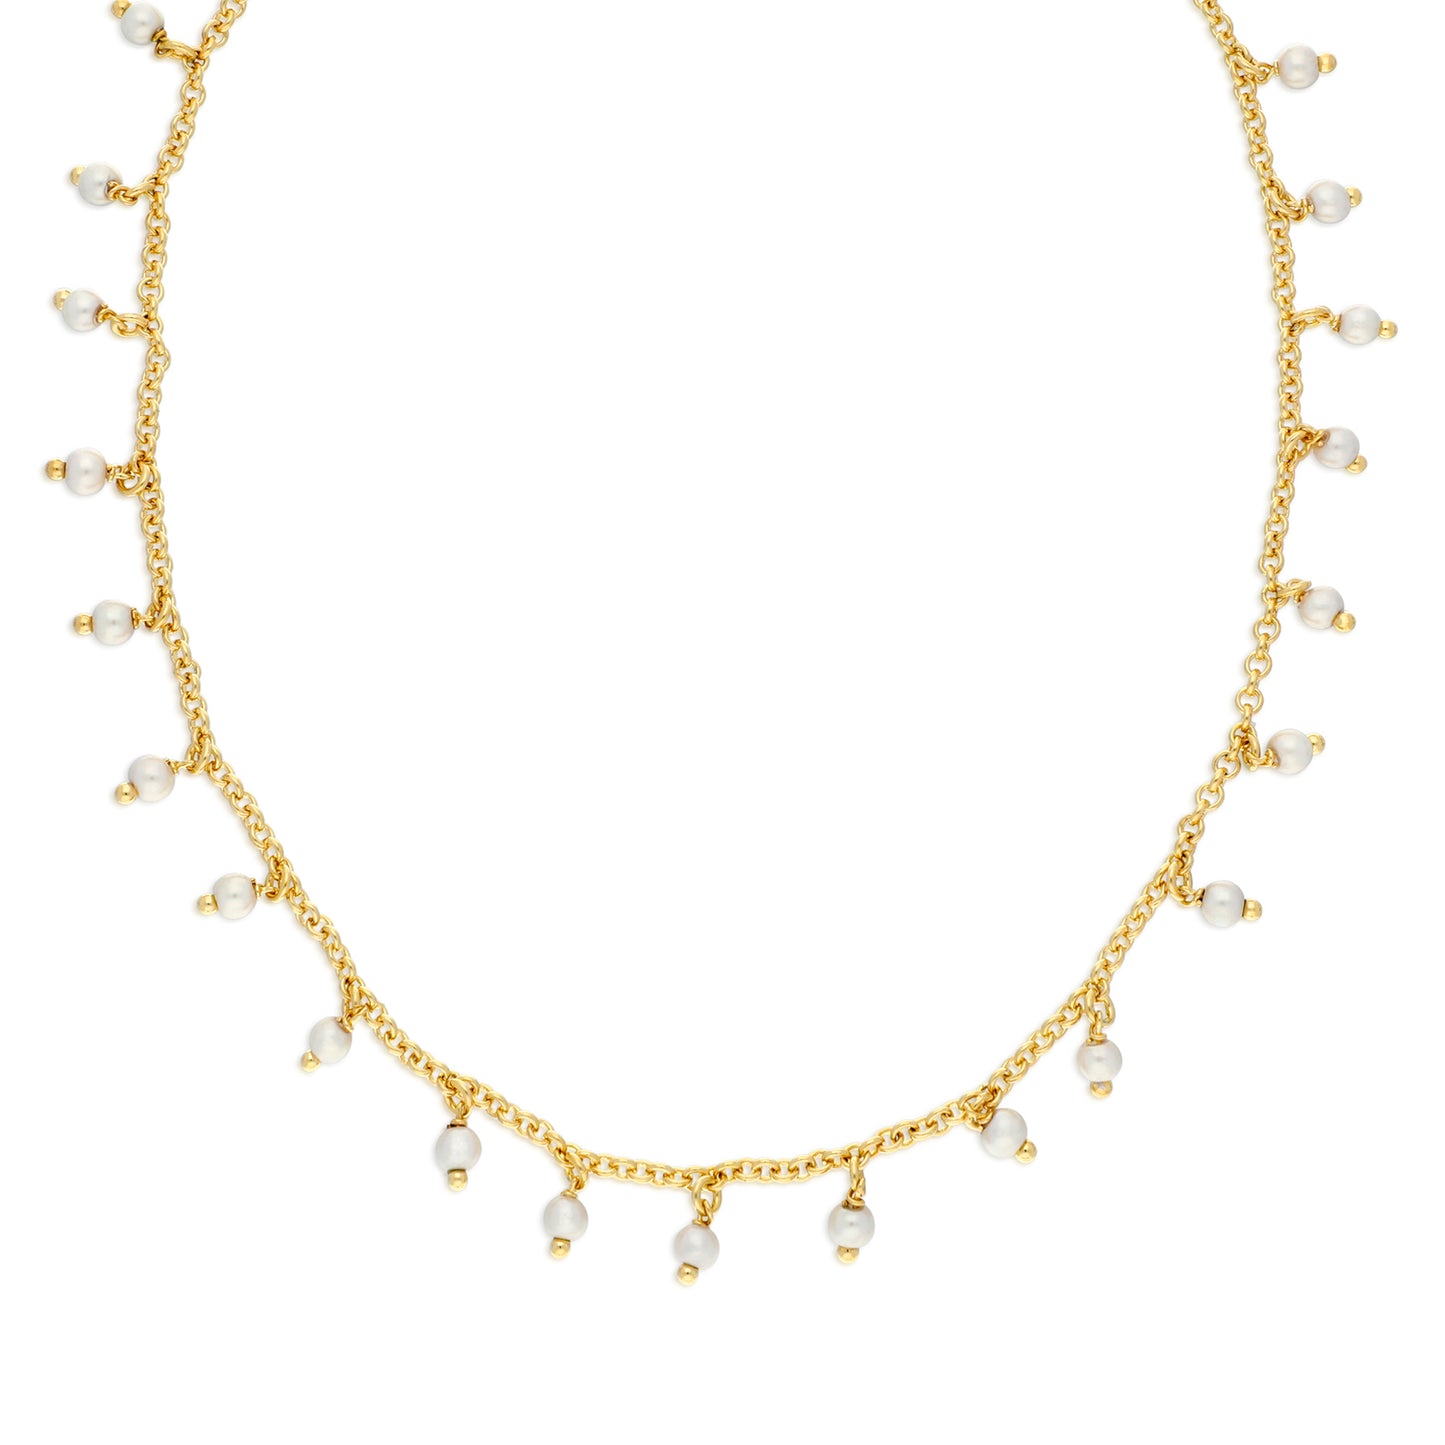 16" Yellow Gold Faux Pearl Necklace